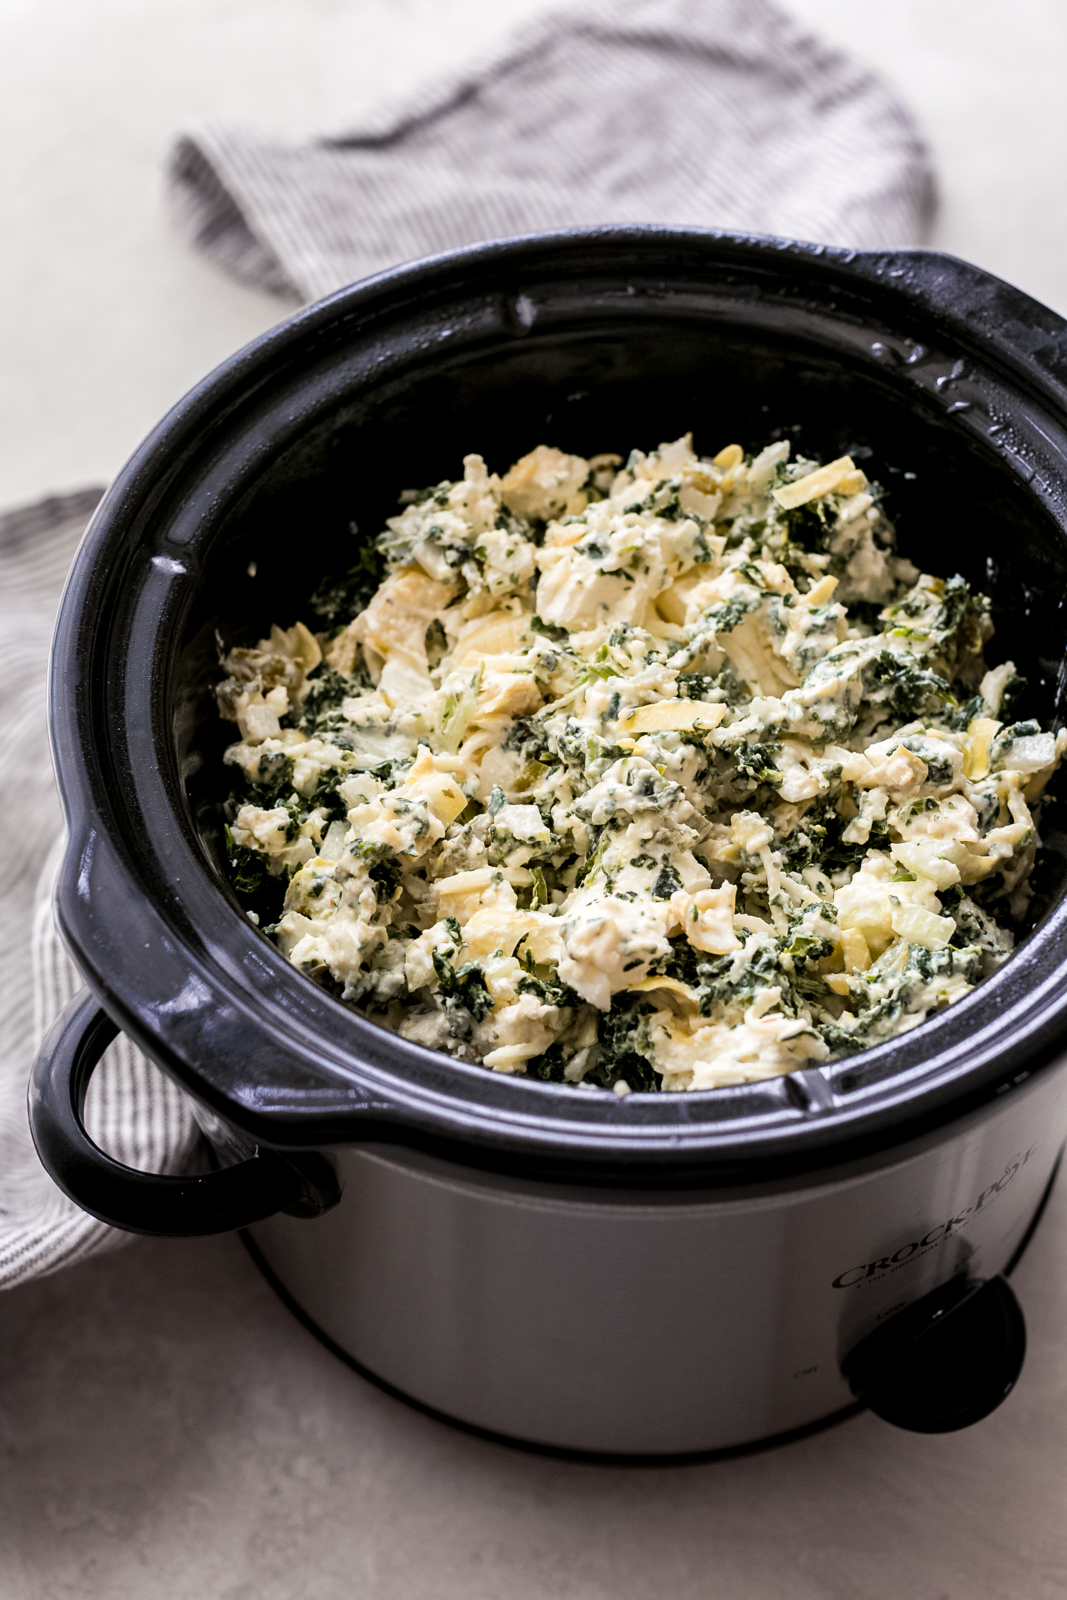 slow cooker loaded with mixed spinach dip ingredients before cooking